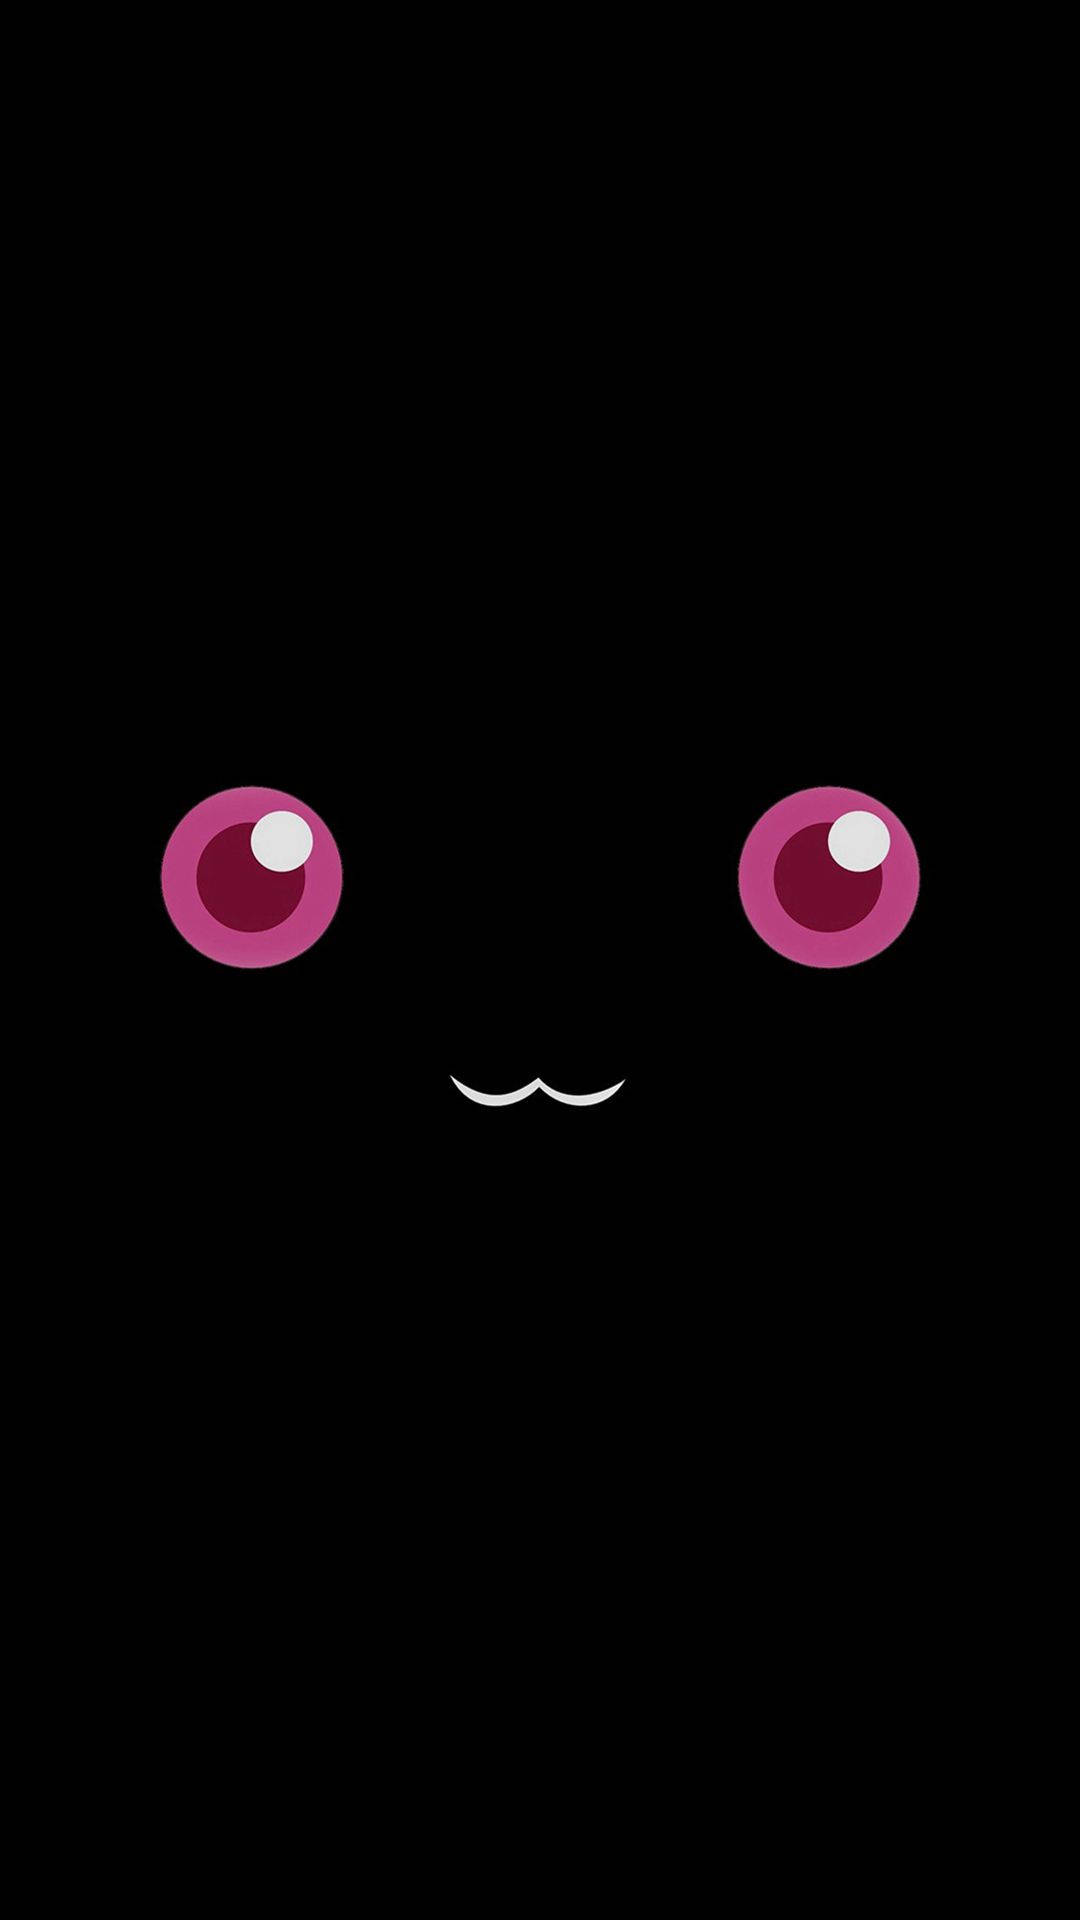 Mystical Black Anime Character with Glowing Pink Eyes Wallpaper